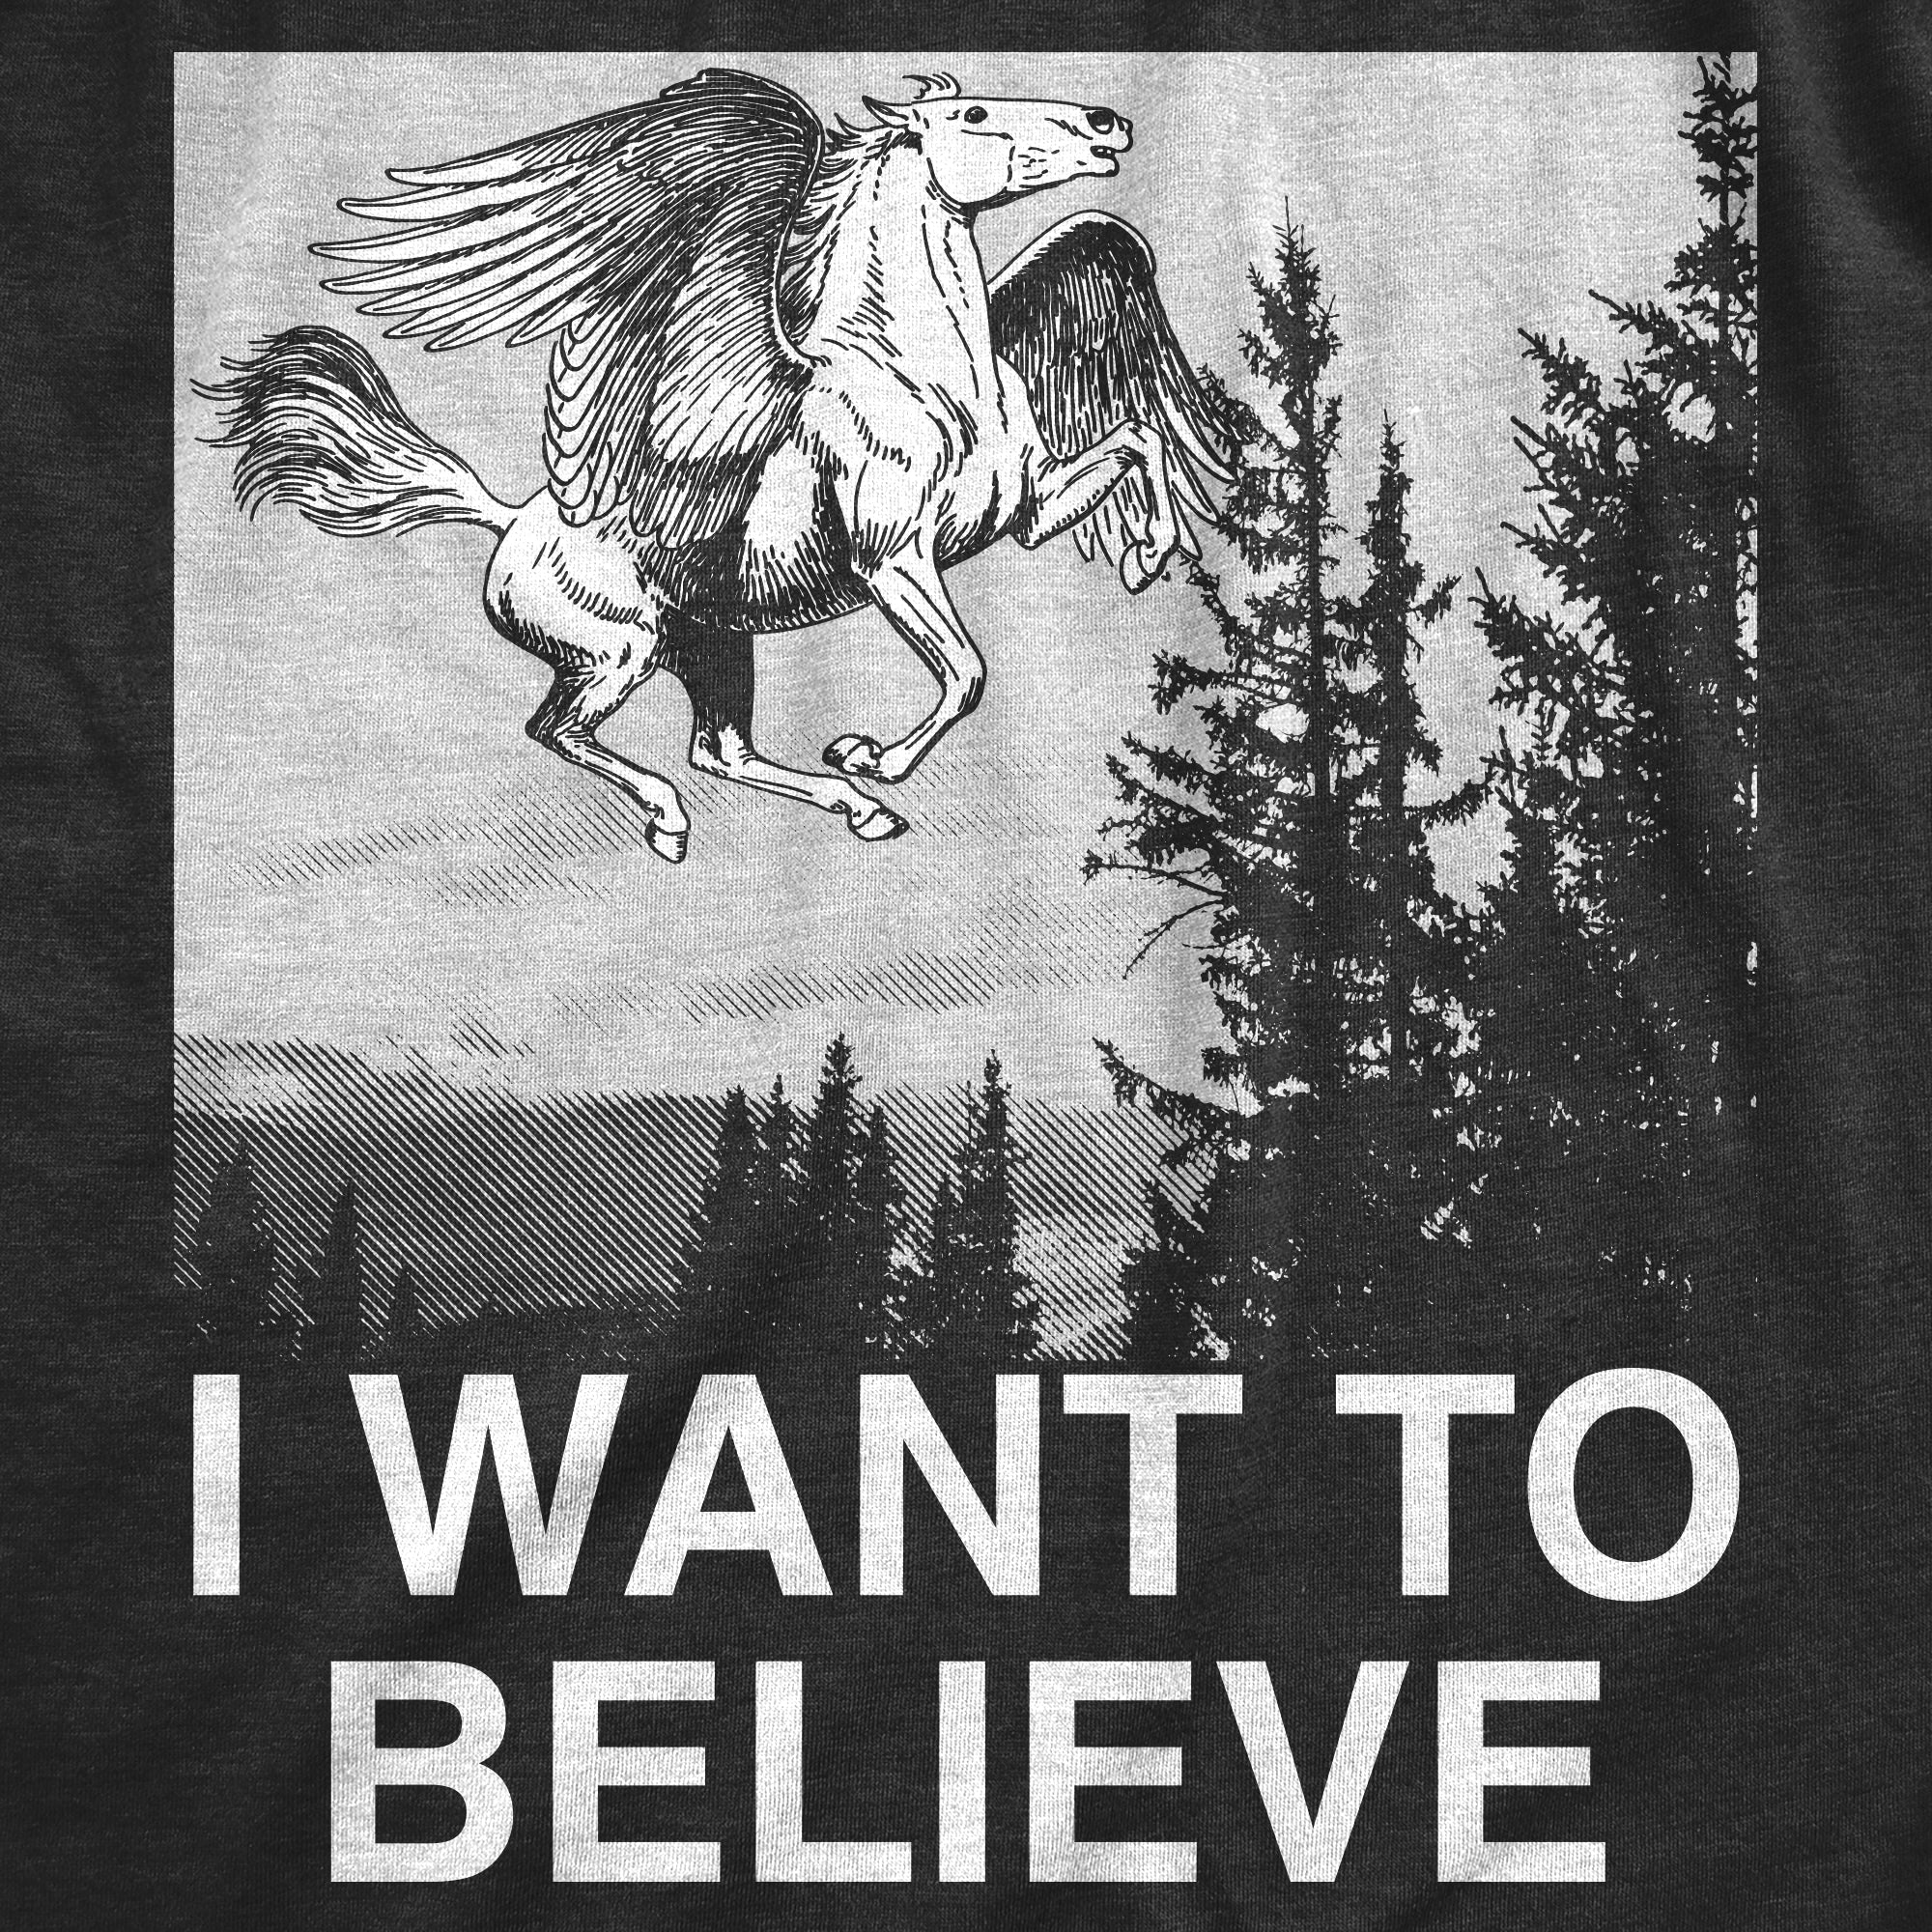 Funny Heather Black - BELIEVE I Want To Believe Pegasus Mens T Shirt Nerdy Sarcastic Animal Tee